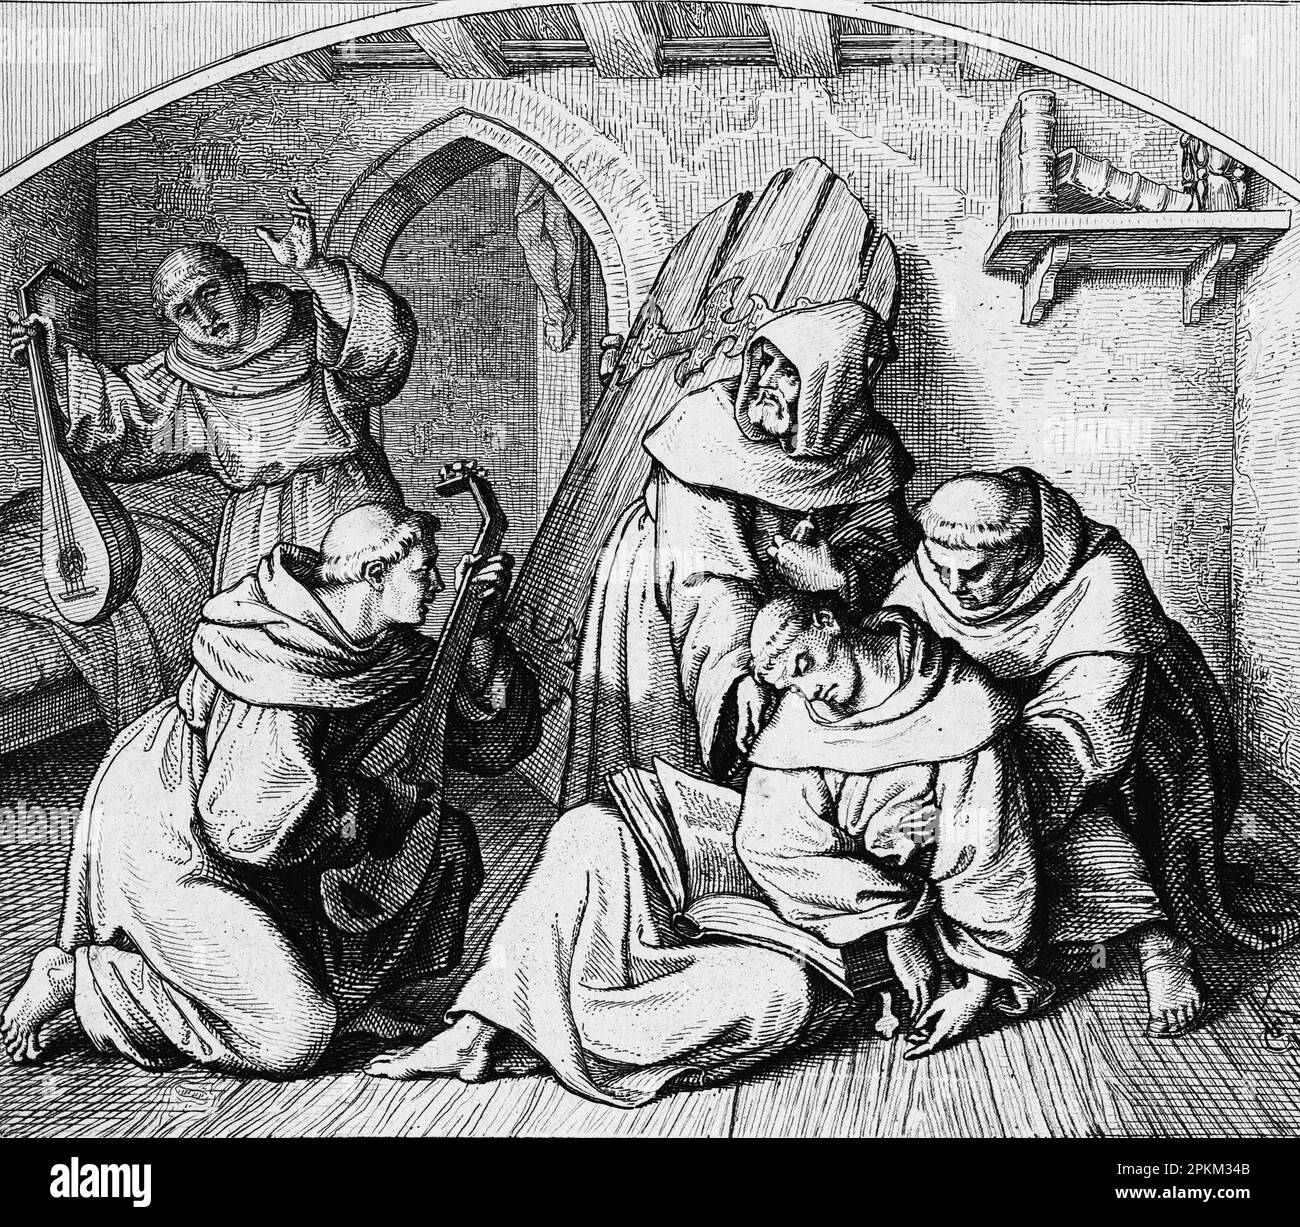 Luther lying in his monastery cell unconciously is put back into life by lute music, historical illustration 1851 Stock Photo